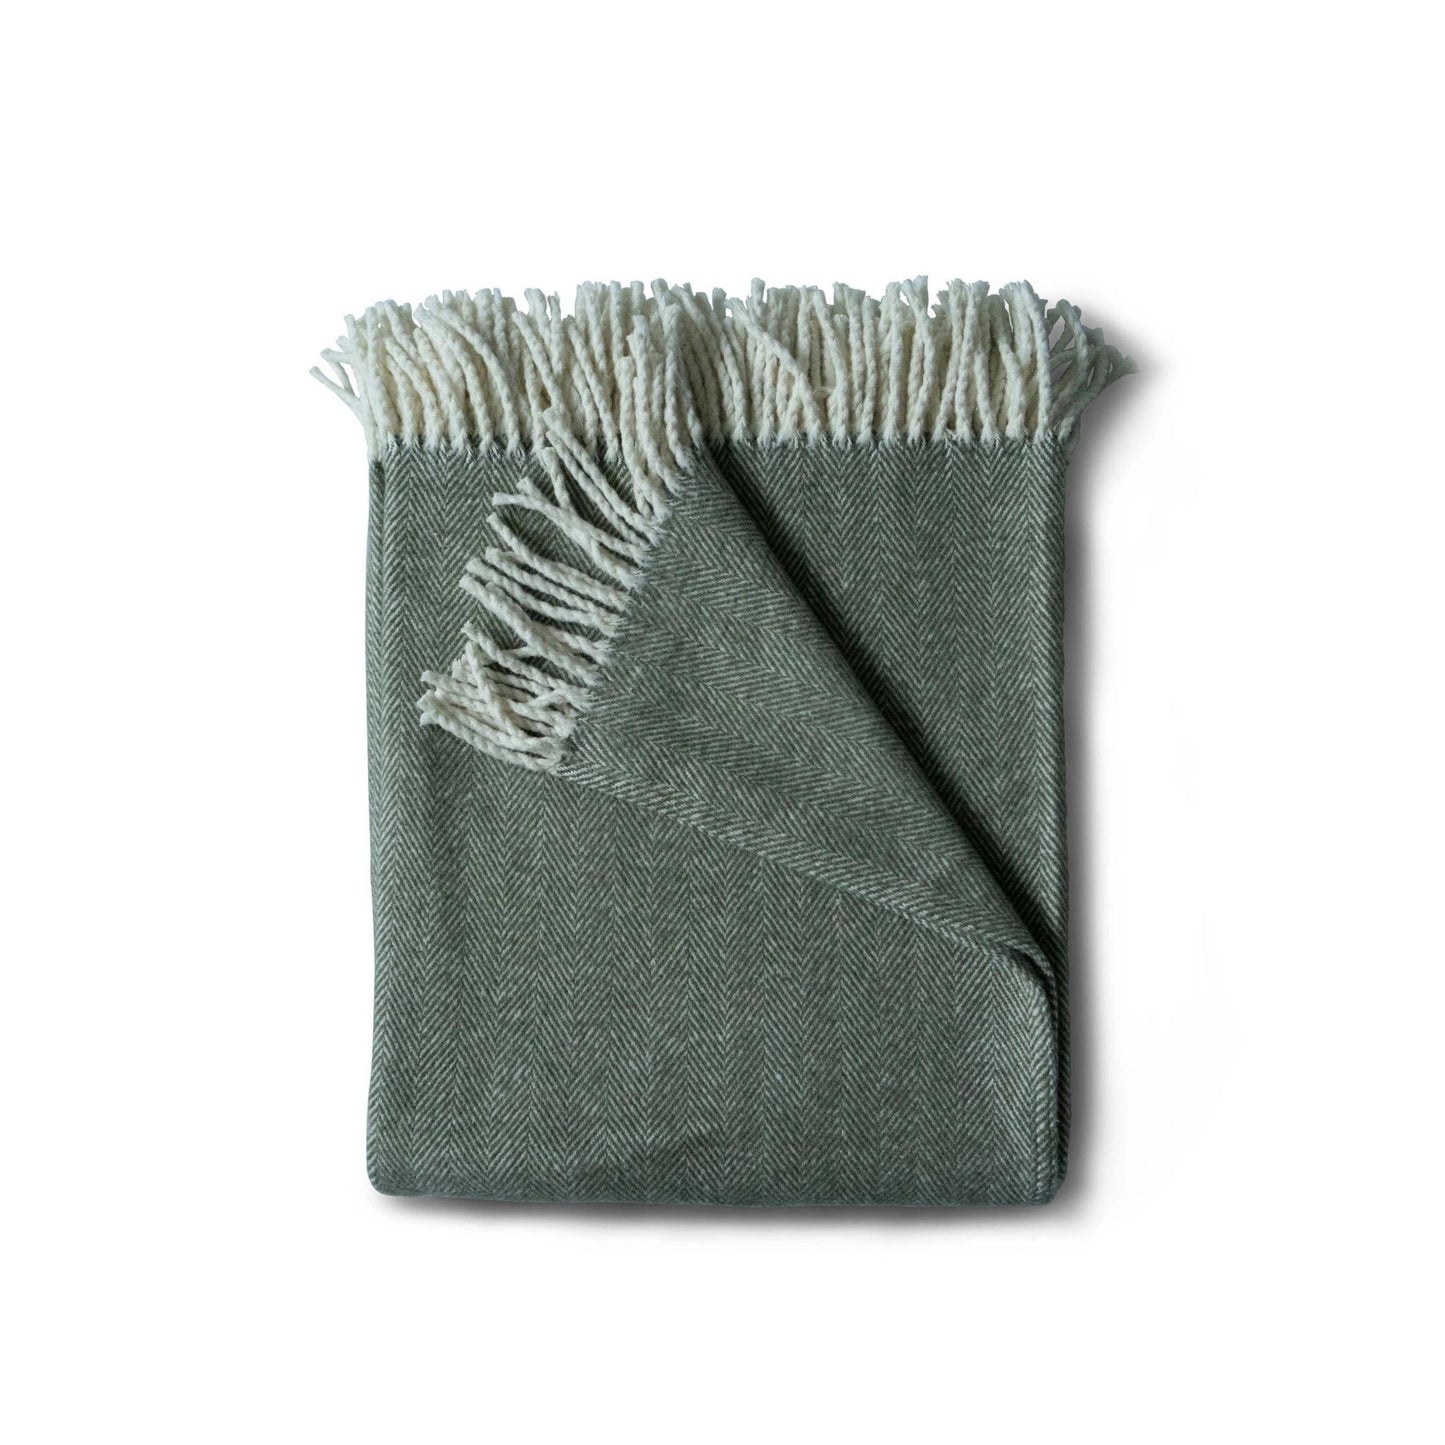 Brushed cotton throw blanket in moss green herringbone pattern with cotton fringe  